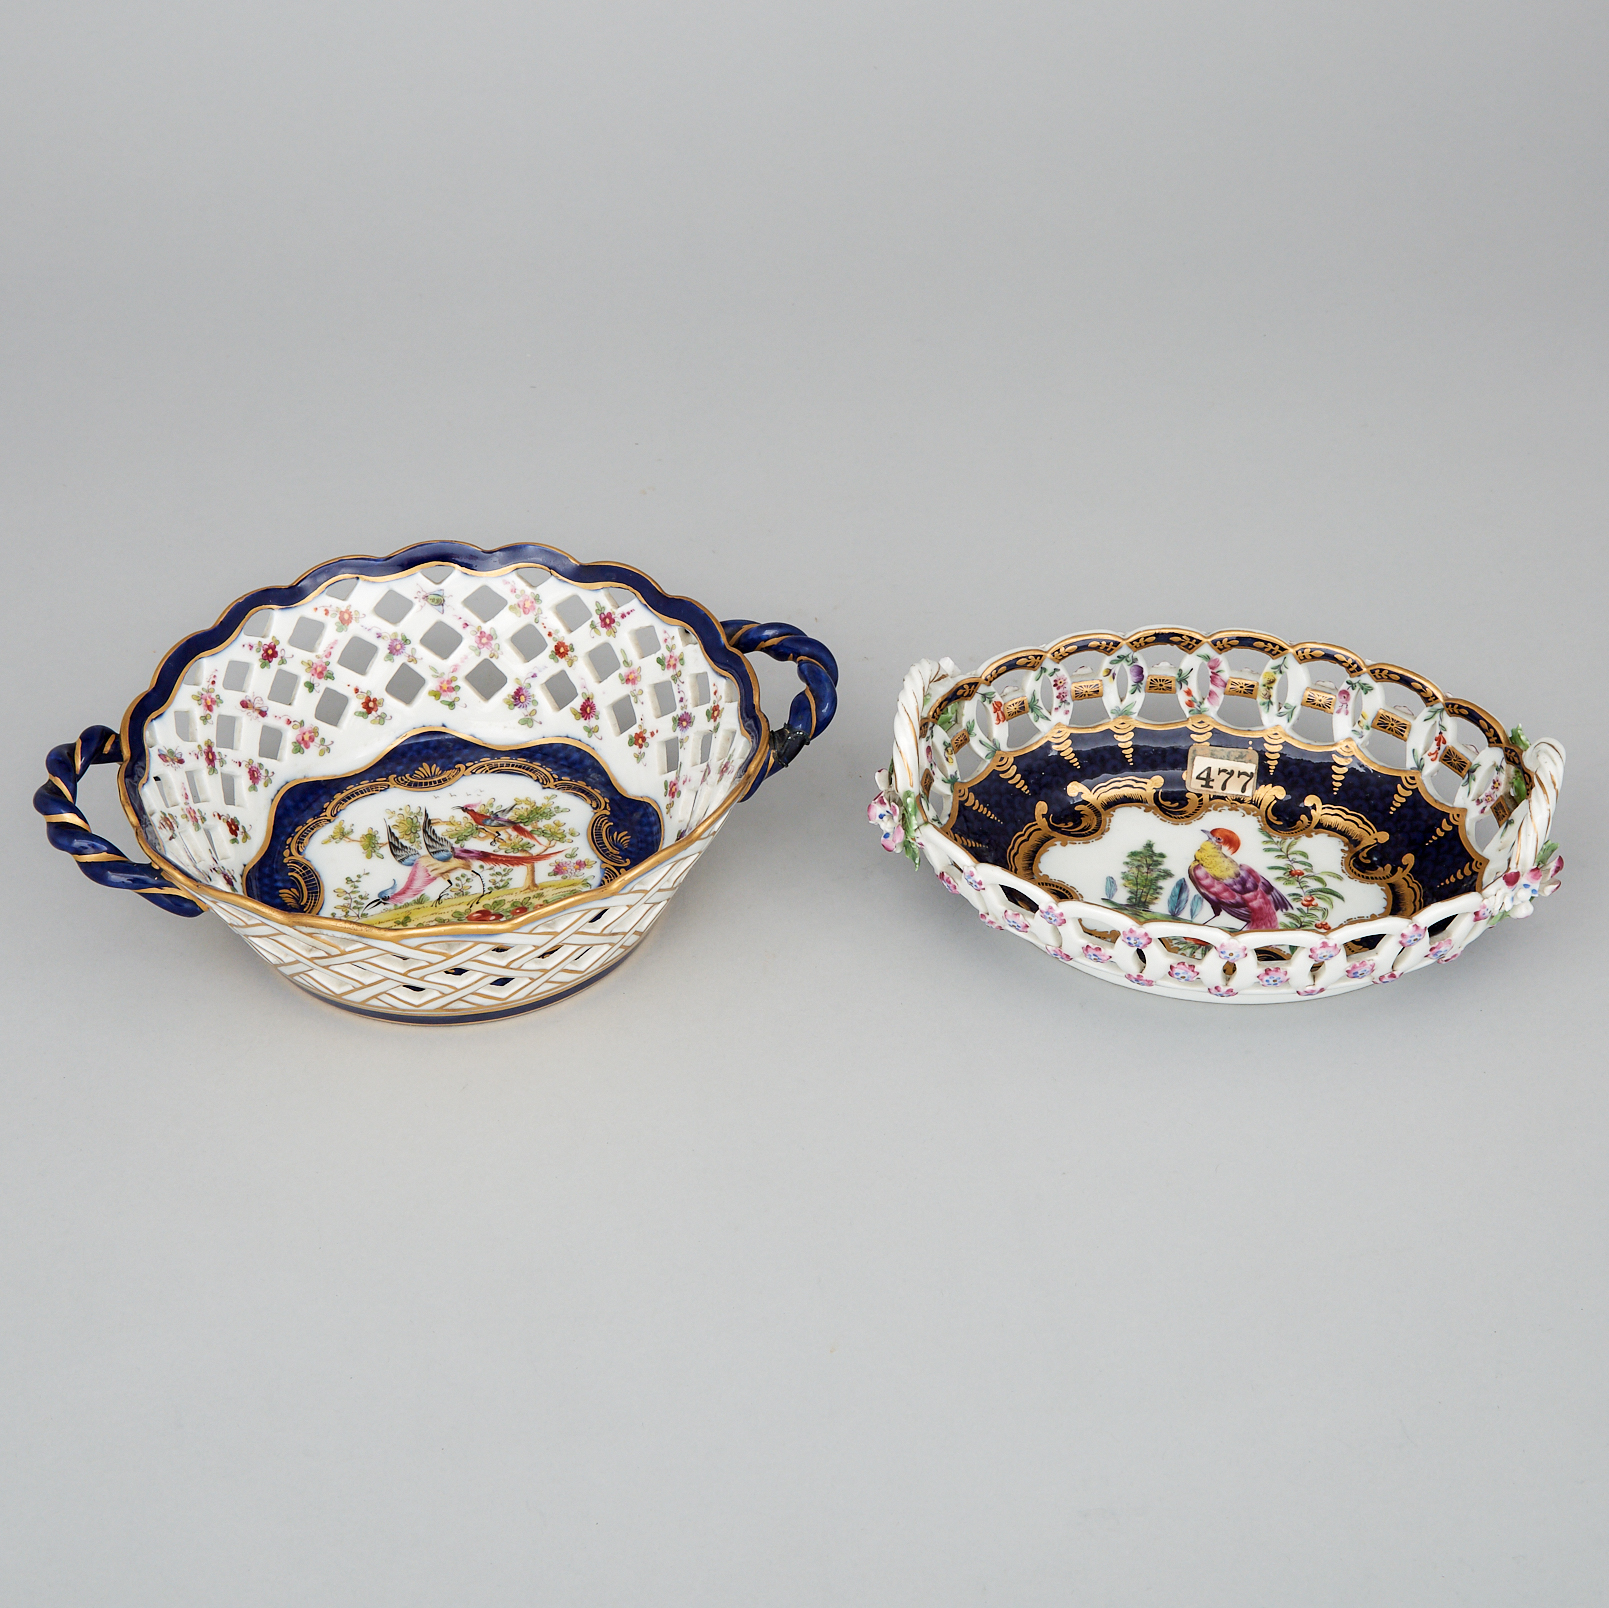 Two Samson ‘Worcester’ Scale Blue Ground Reticulated Baskets, early 20th century